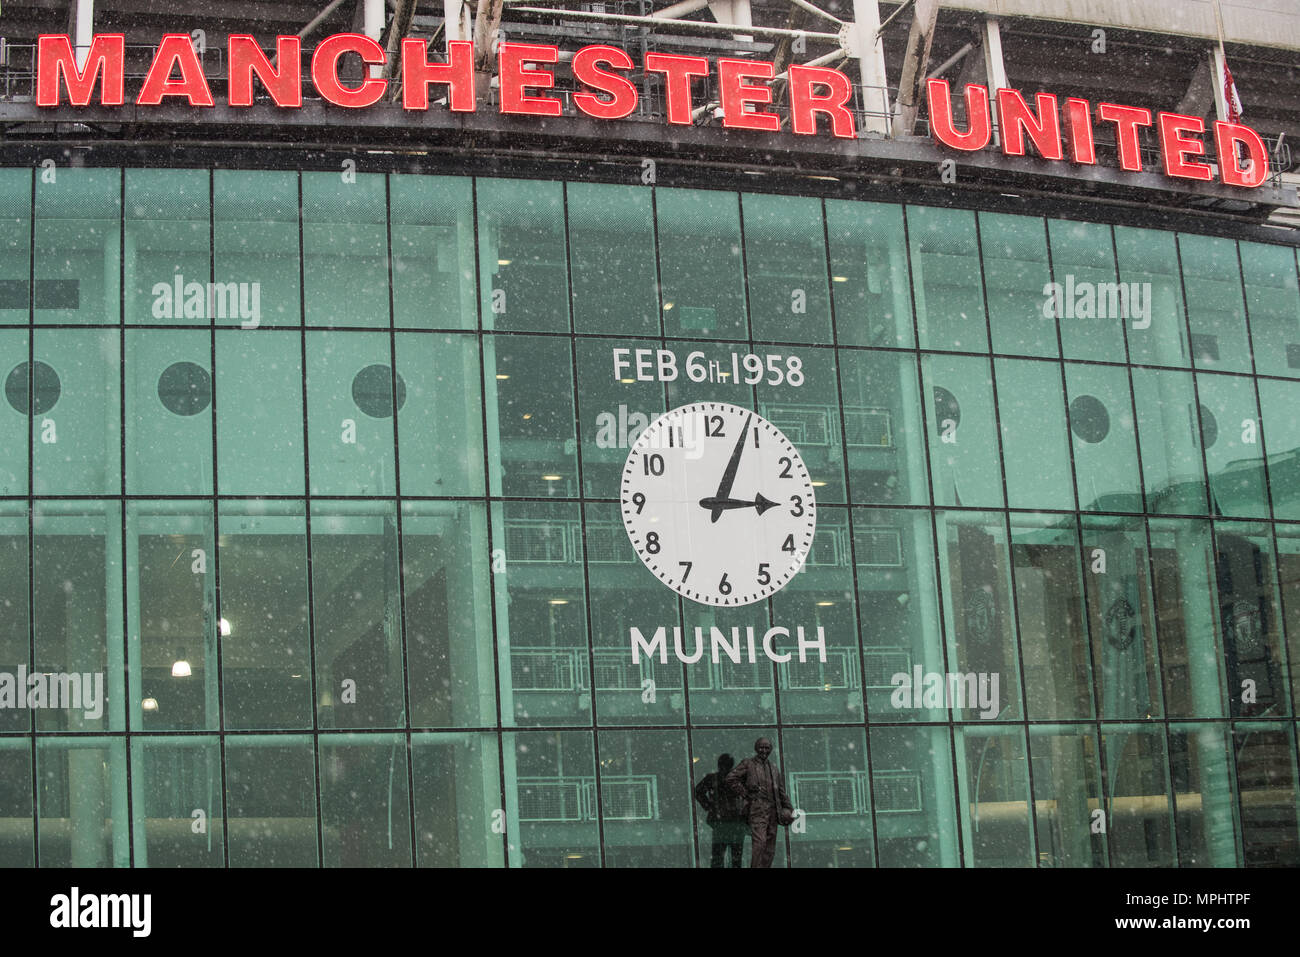 Old Trafford. Manchester United. Munich Air Disaster Memorial. Stockfoto